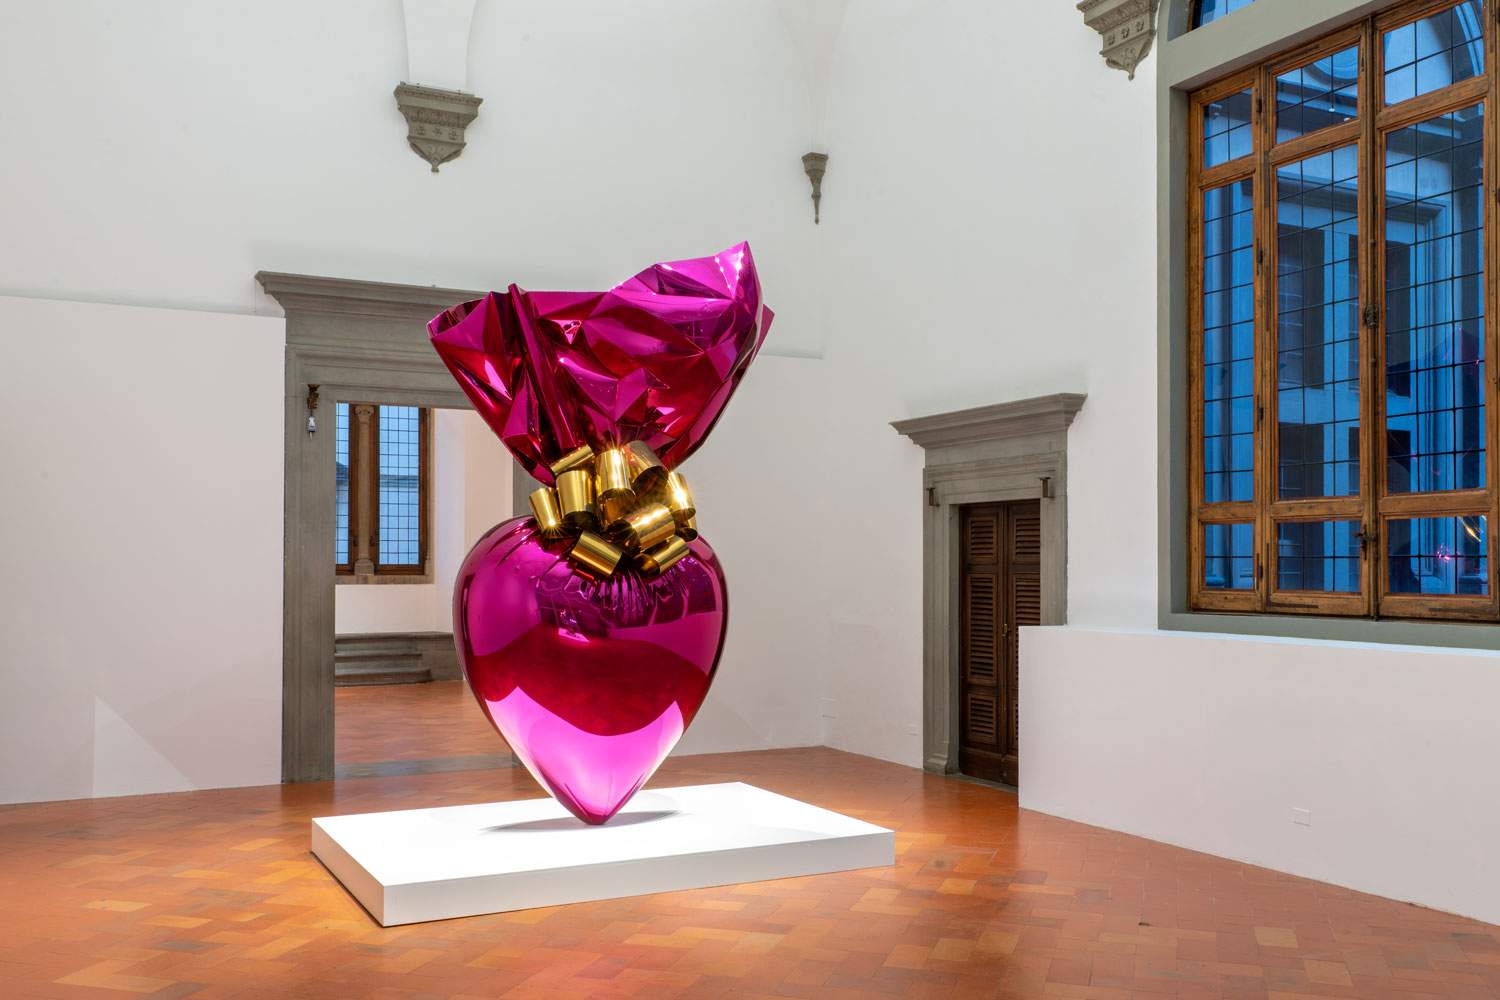 Florence, Jeff Koons exhibition begins at Palazzo Strozzi 